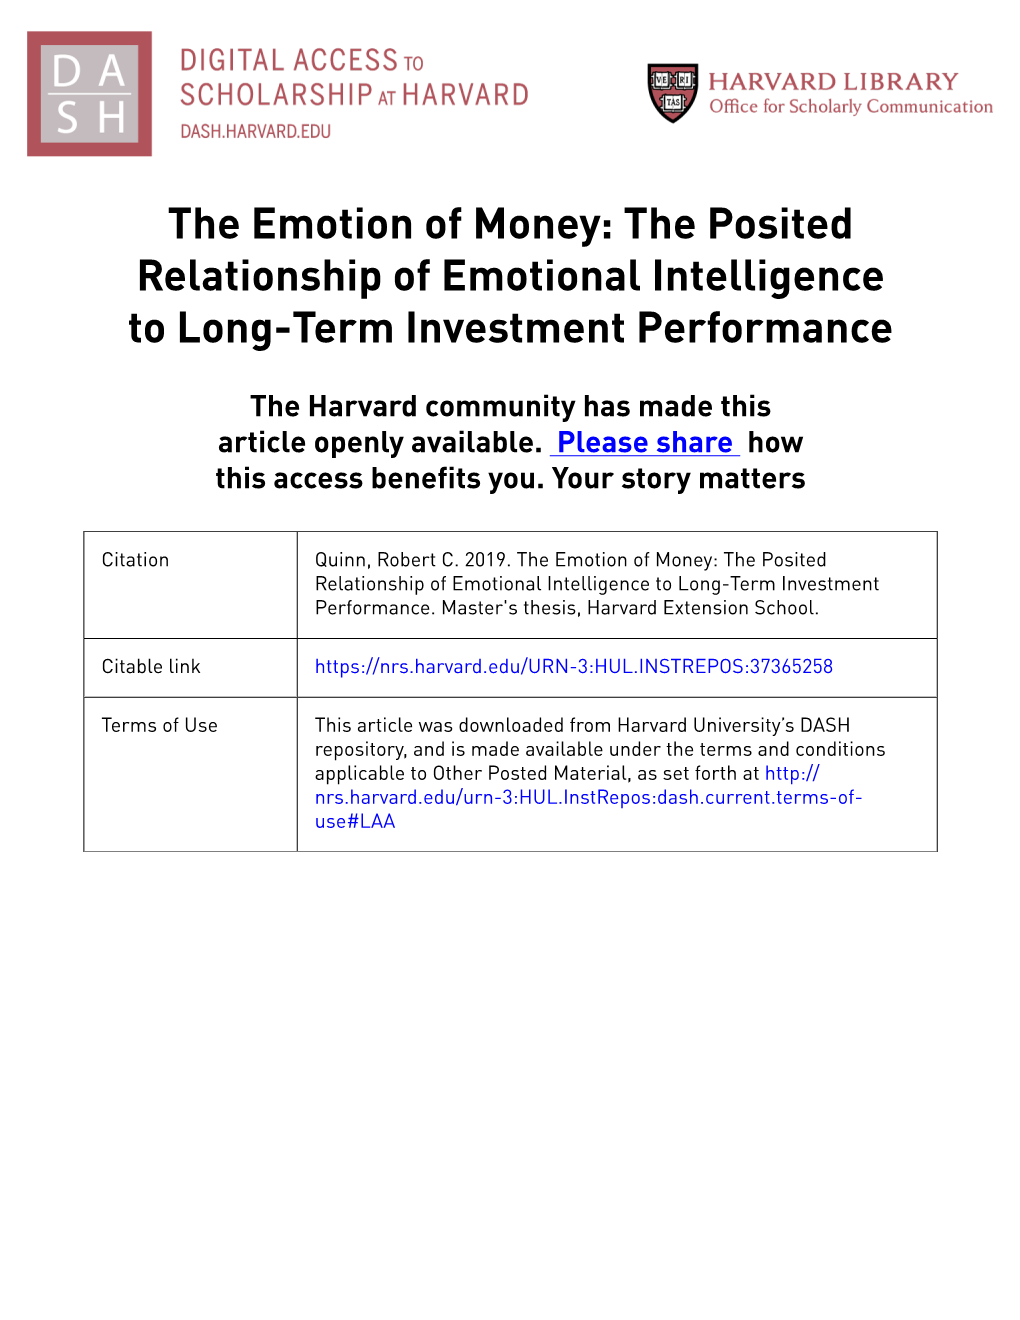 The Emotion of Money: the Posited Relationship of Emotional Intelligence to Long-Term Investment Performance